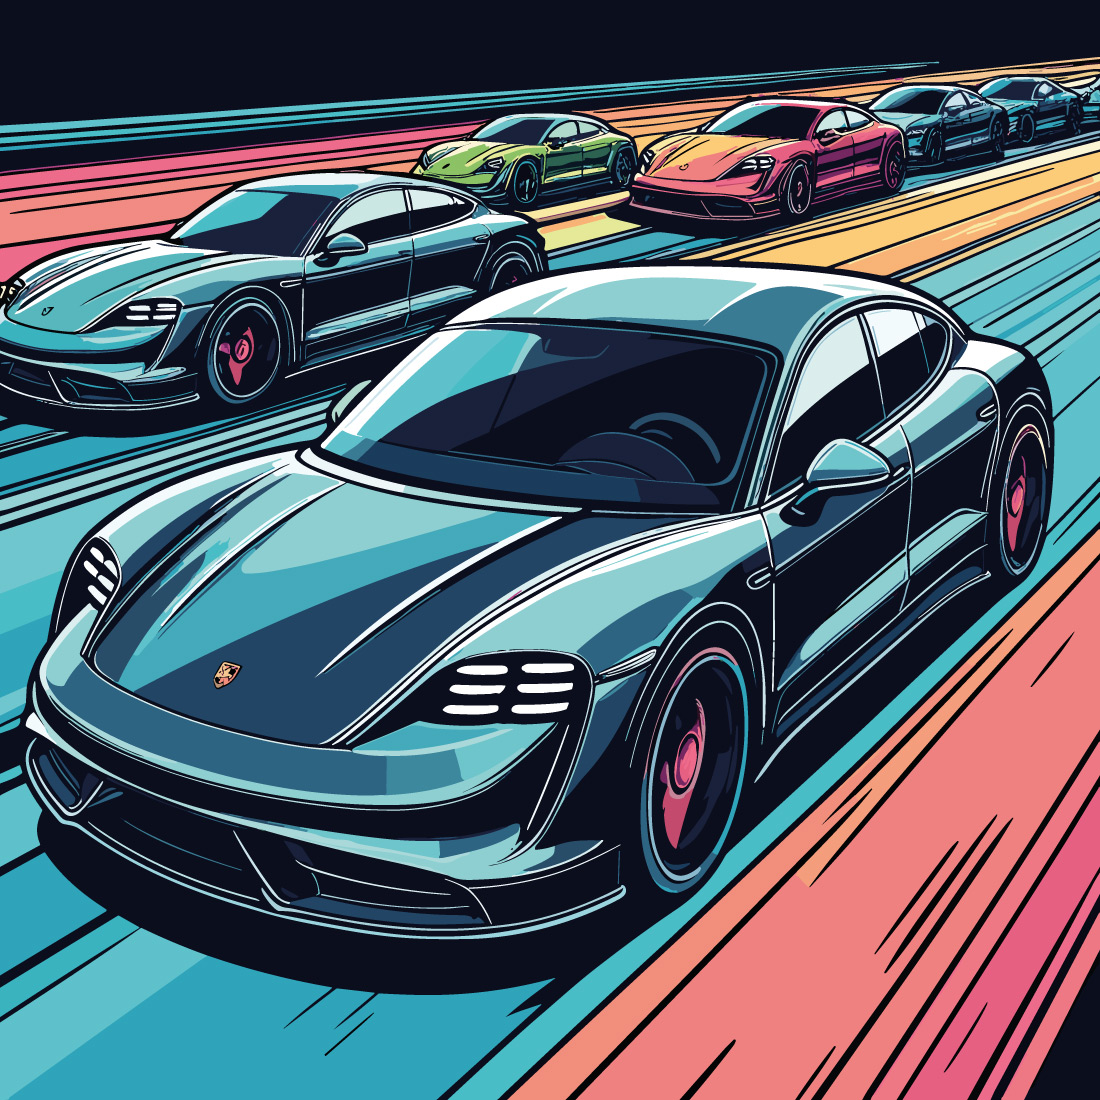 Super Cars preview image.